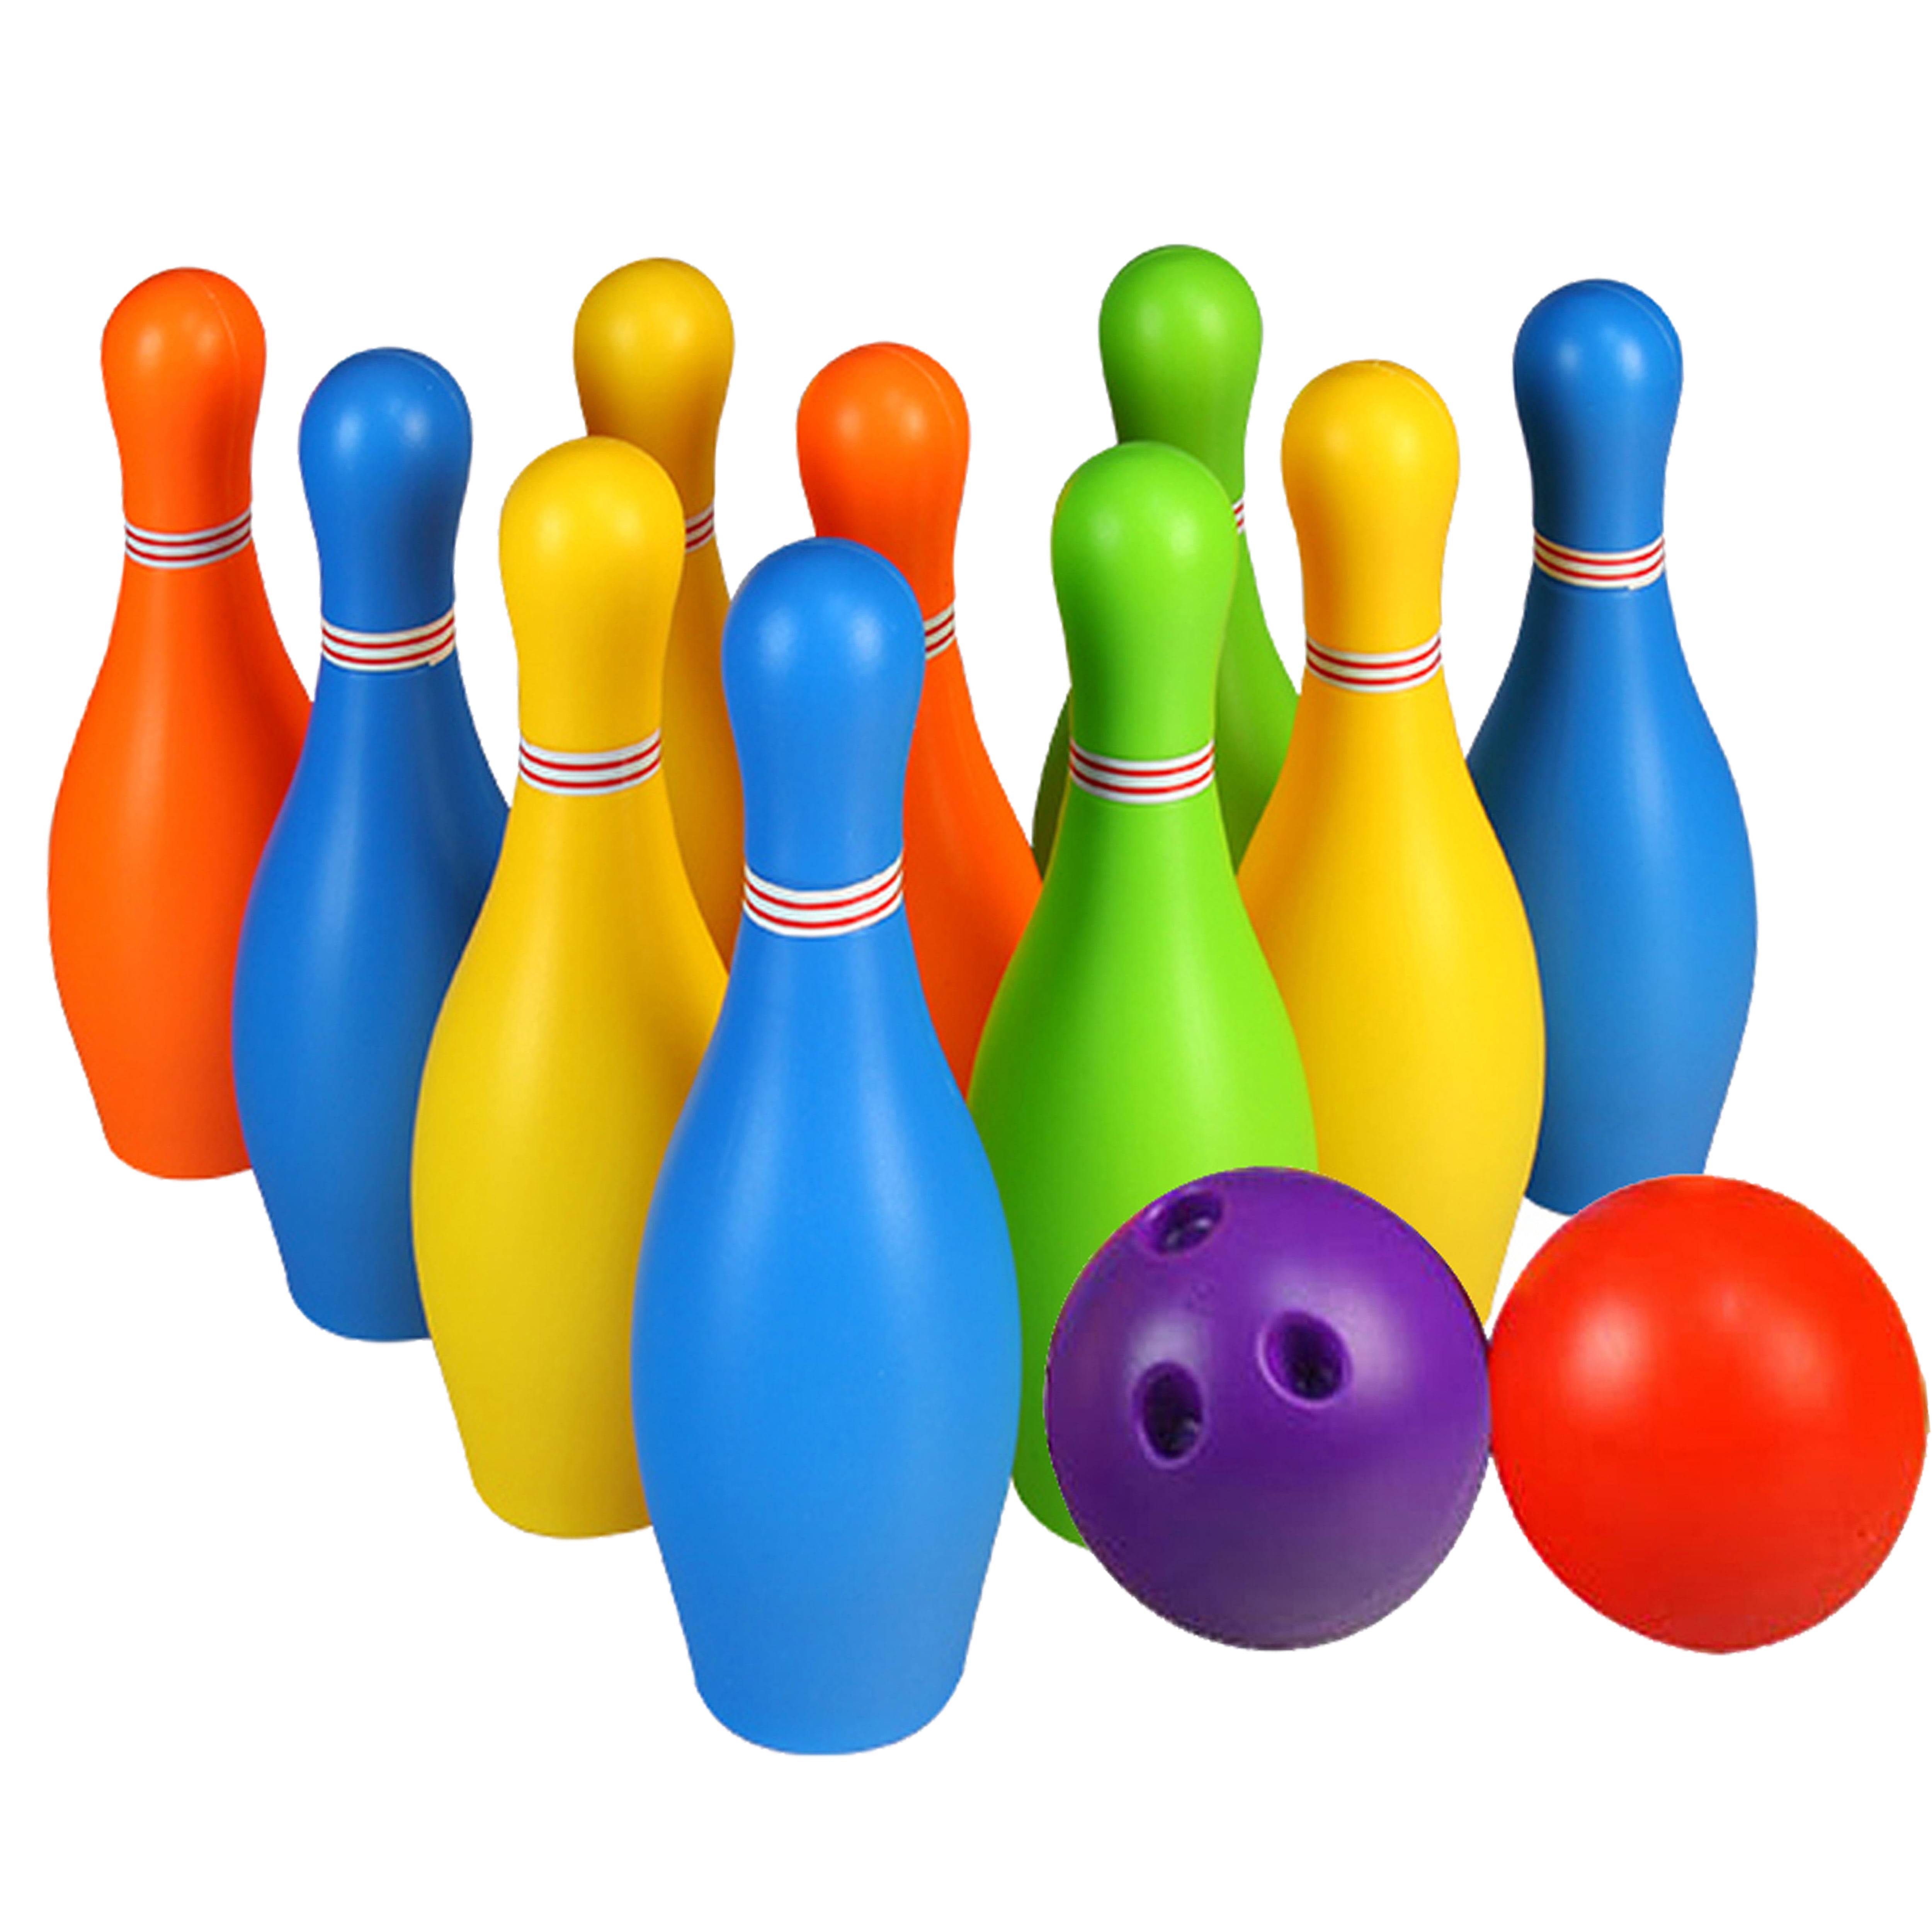 Toy Kids Bowling Set ,Includes 10 White / Rainbow Pins & 2 Balls Suitable  as Toy Gifts, Early Education Indoor Games Toy